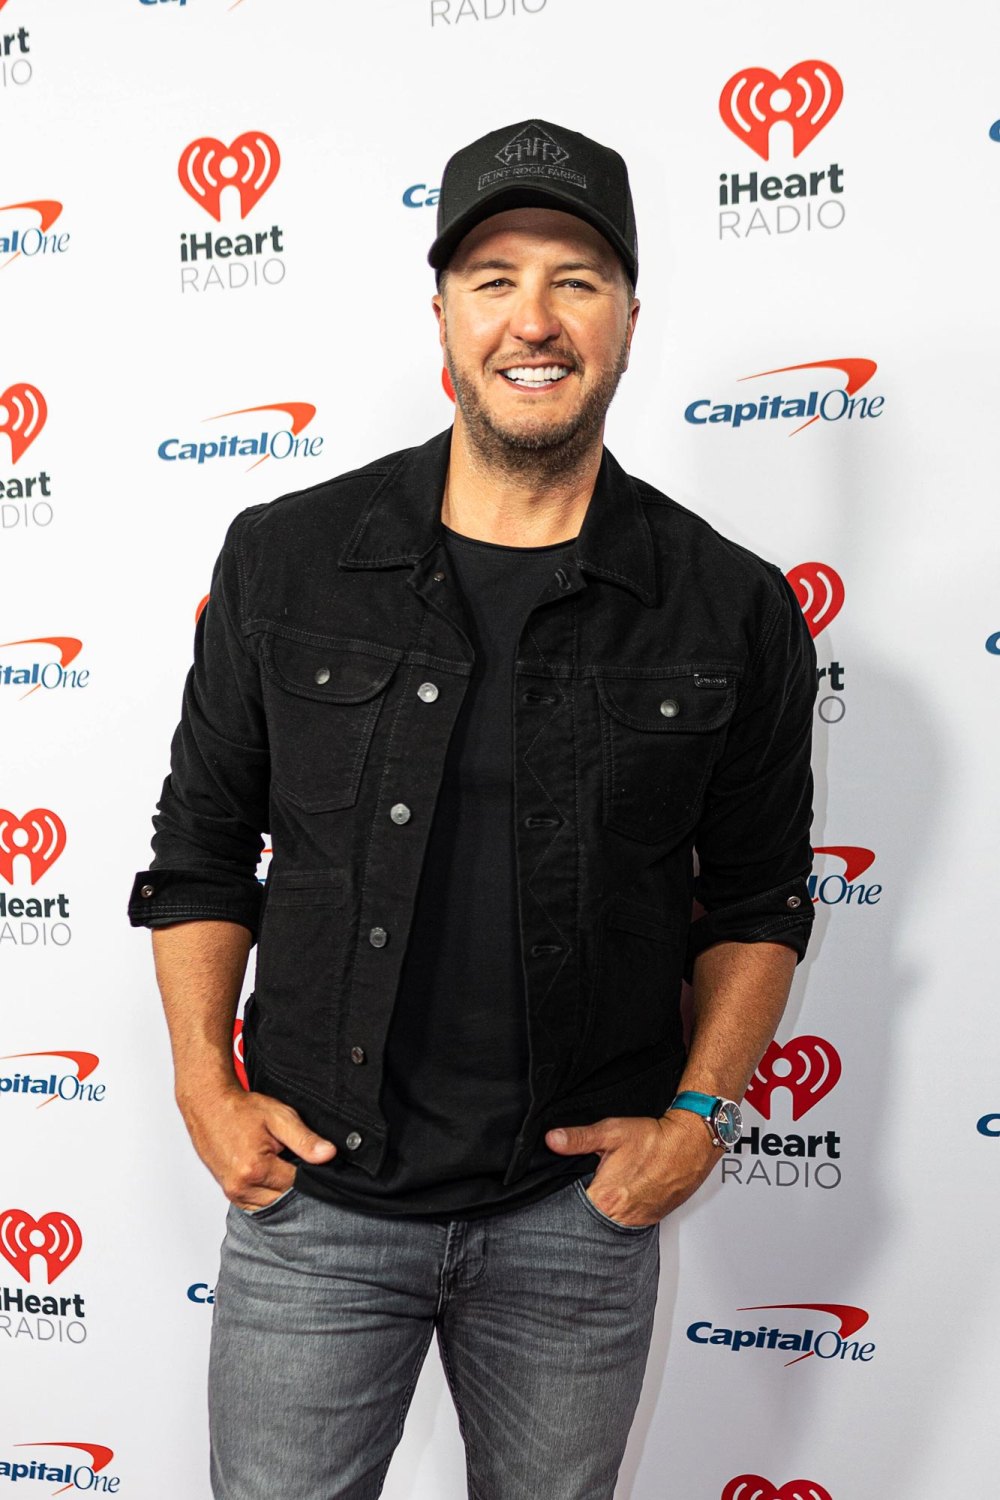 Luke-Bryan-Admits-He-s--Not-Balancing--His-Work-and-Family--That-Well--Right-Now--Wants-to--Slow-Down--After--Rough-Year- -390